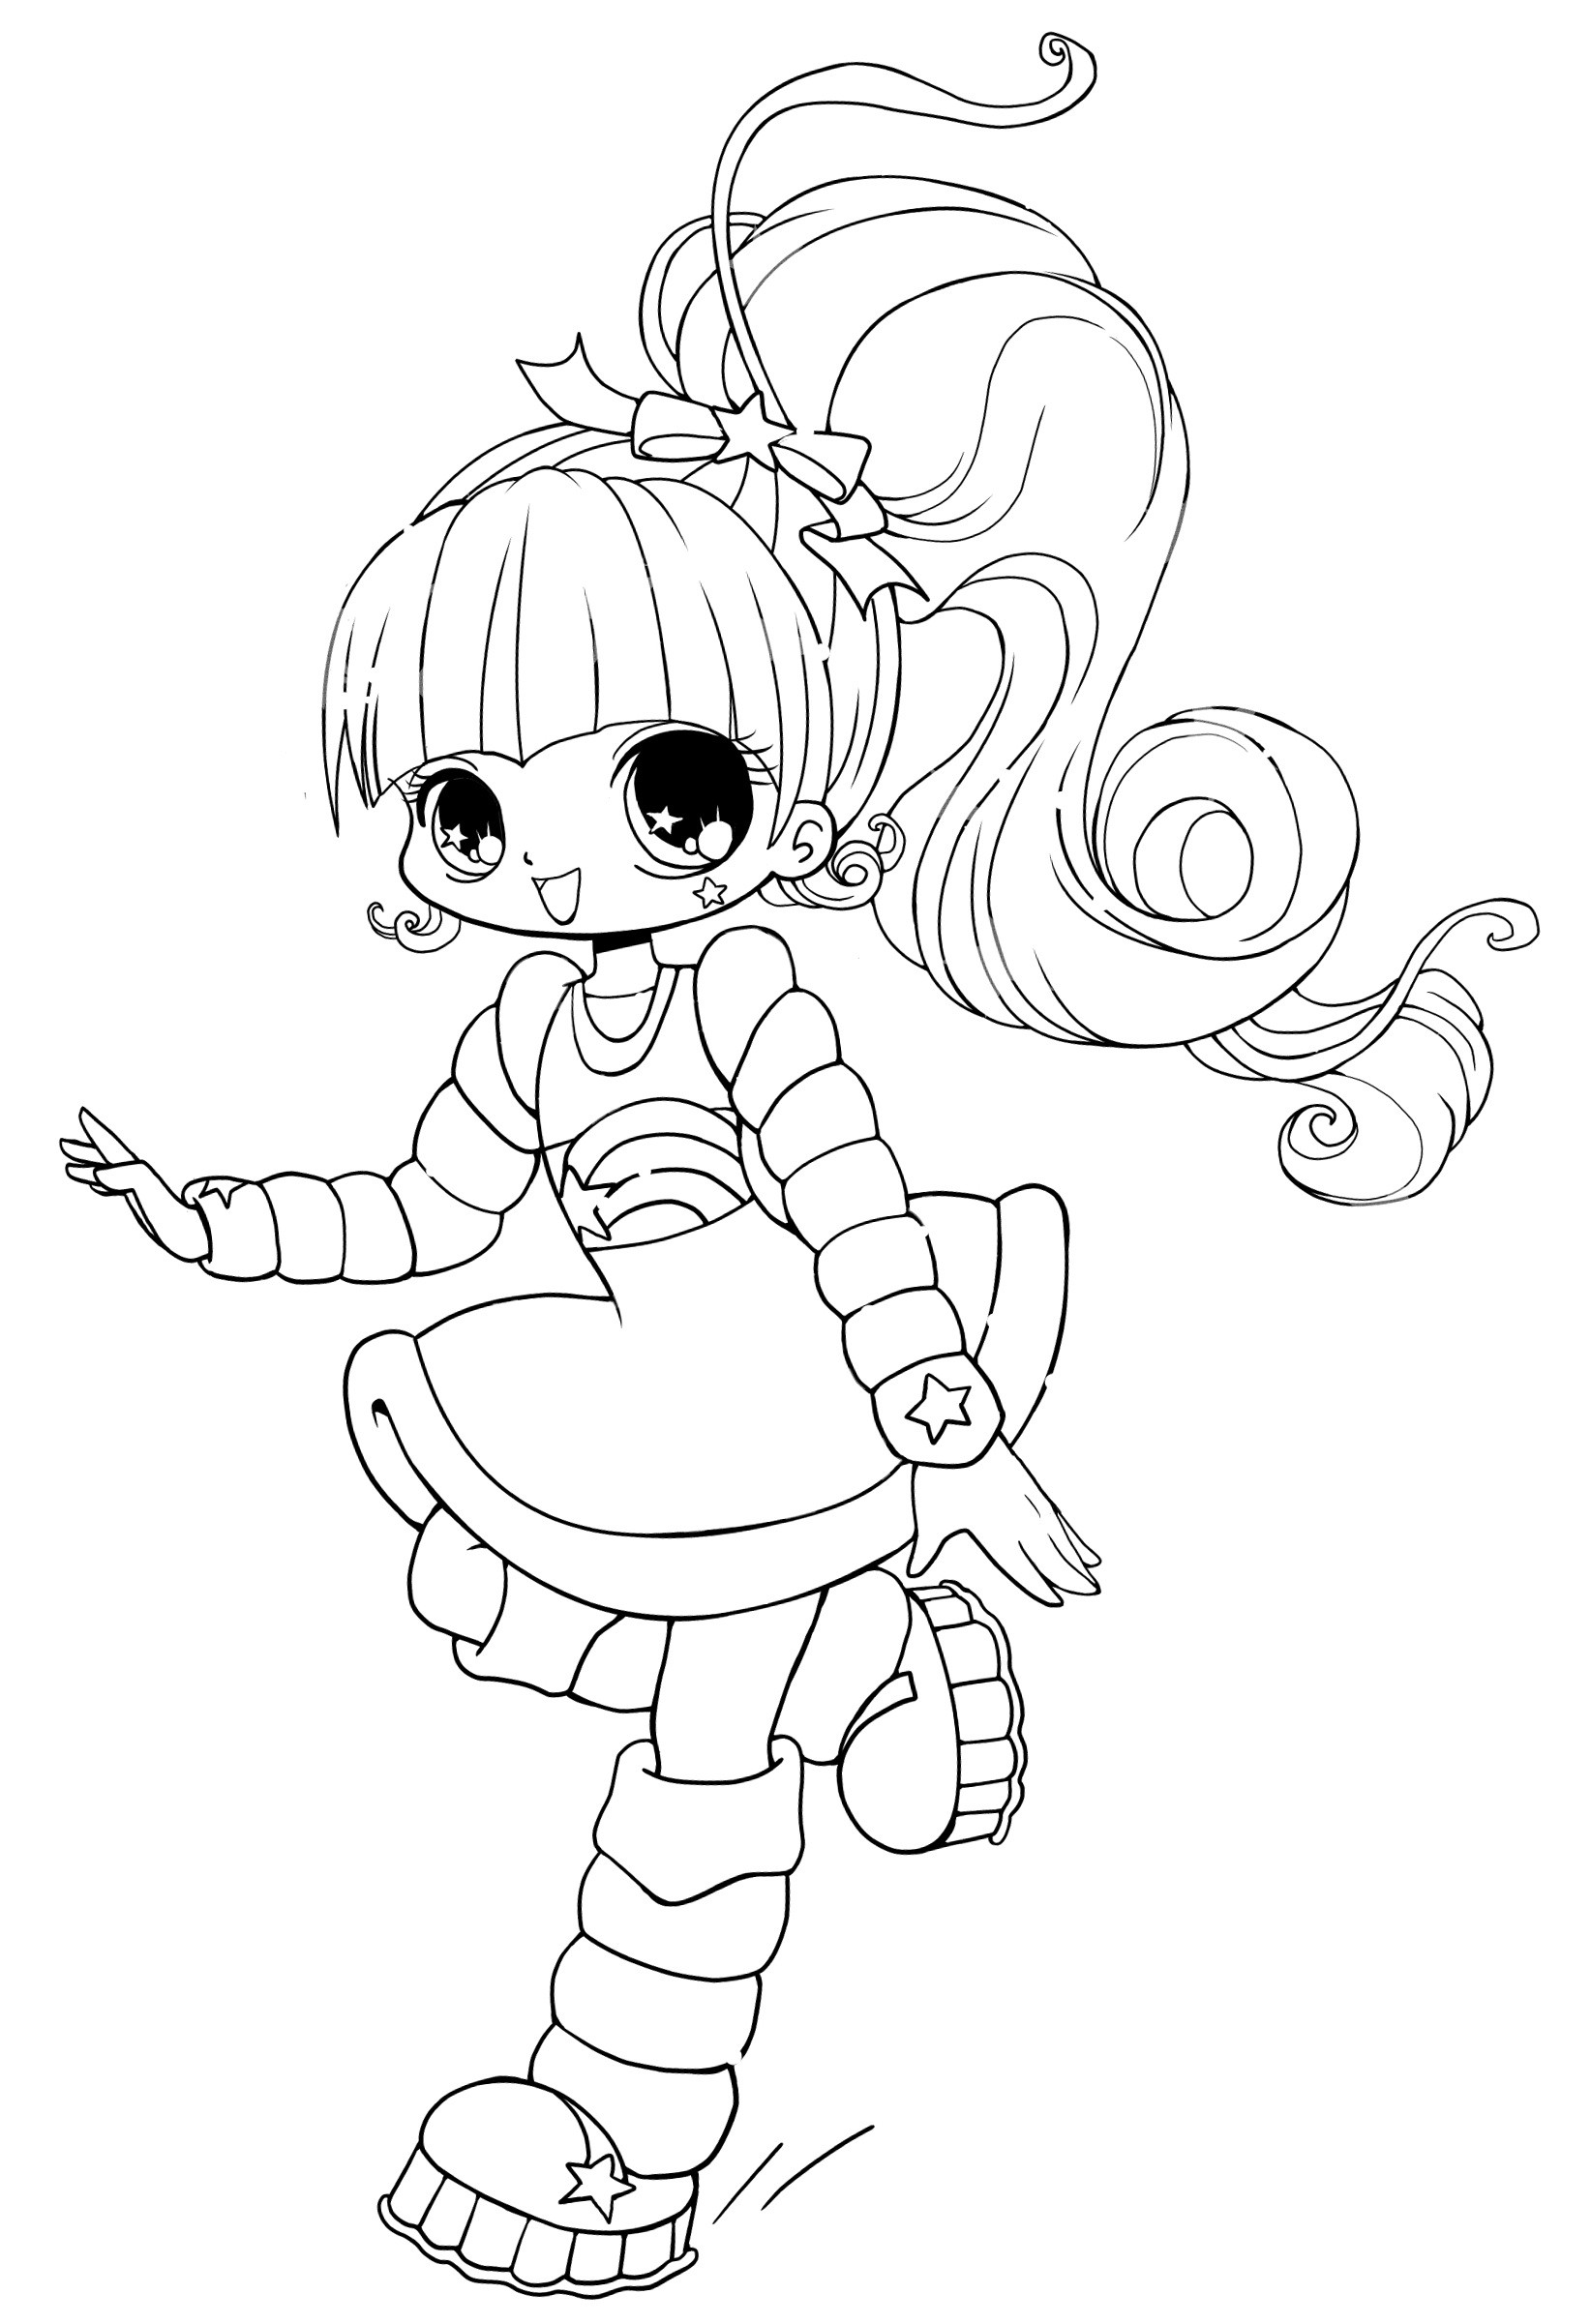 Cut Coloring Pages
 Free Printable Chibi Coloring Pages For Kids